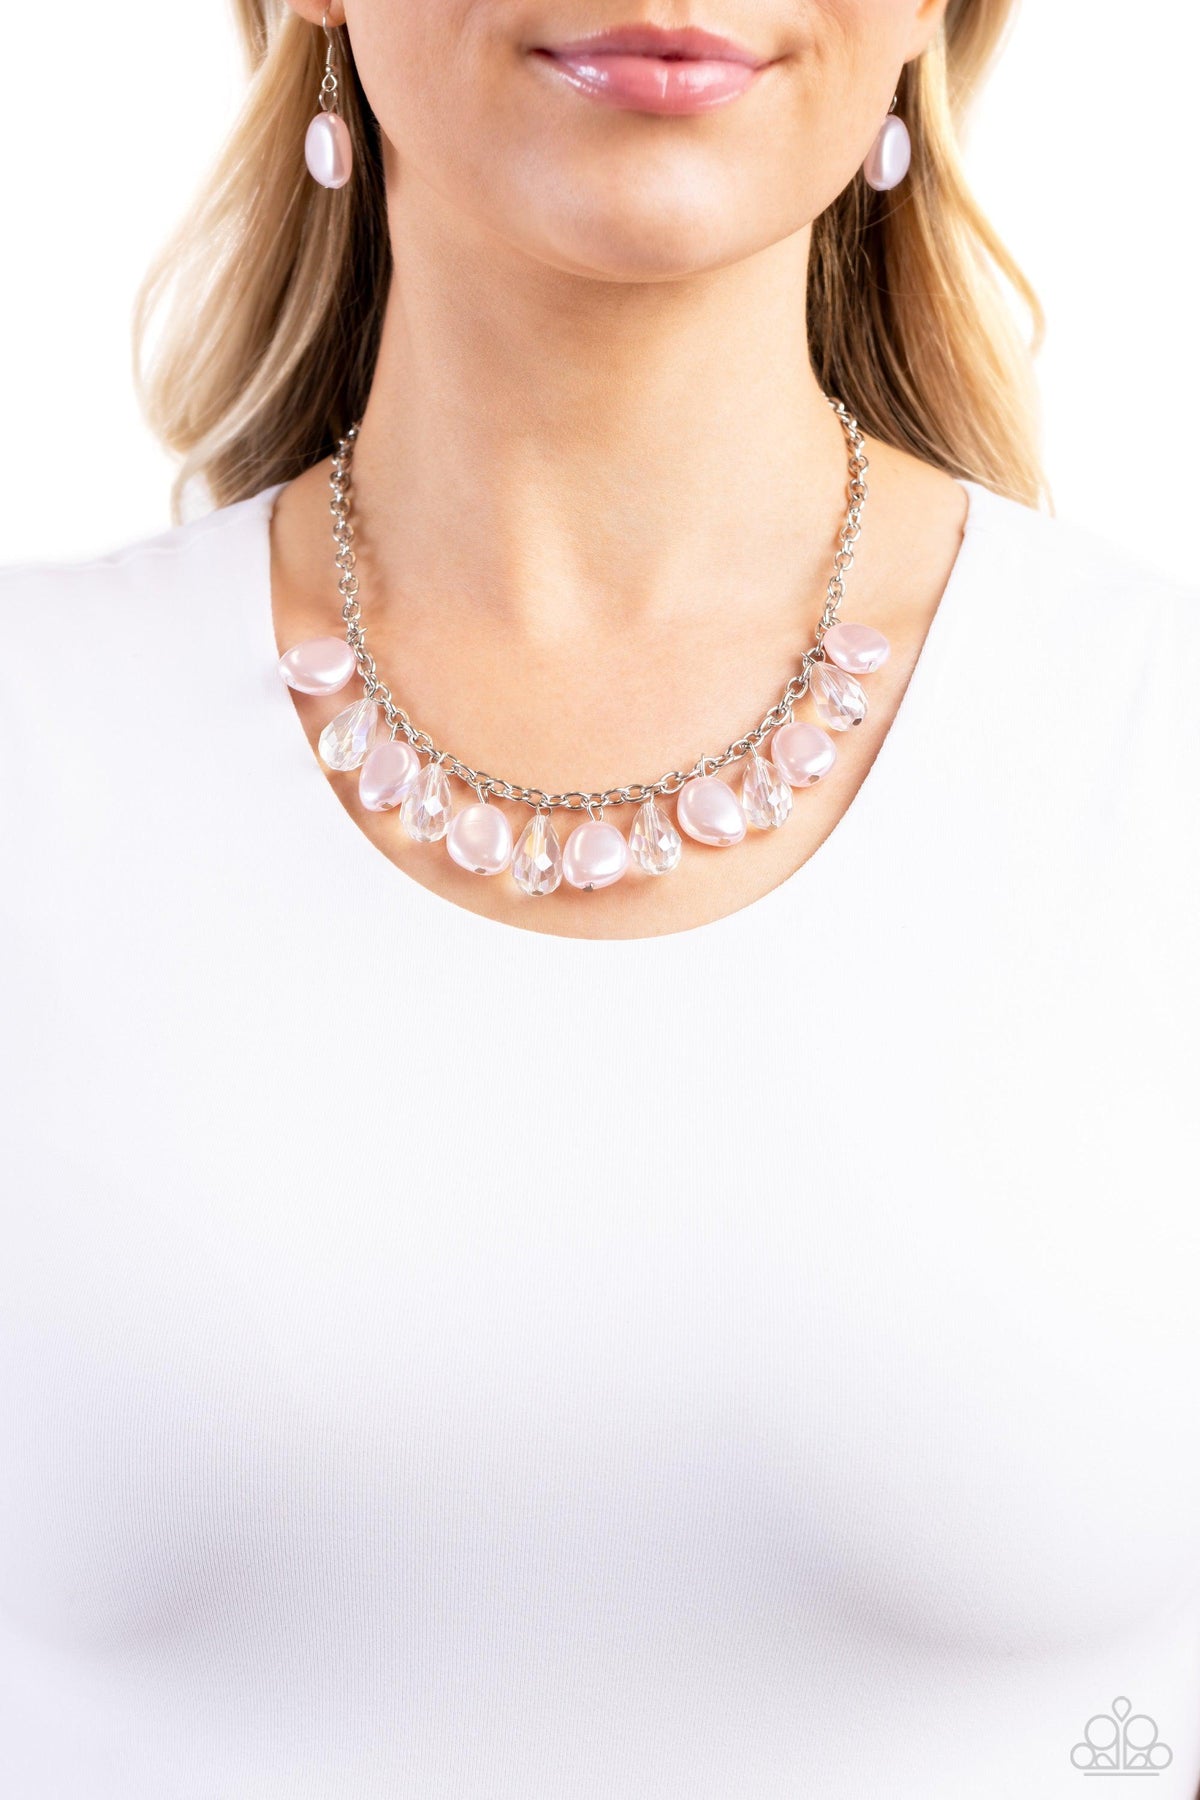 Welcome to BALL Street Pink Necklace - Paparazzi Accessories-on model - CarasShop.com - $5 Jewelry by Cara Jewels